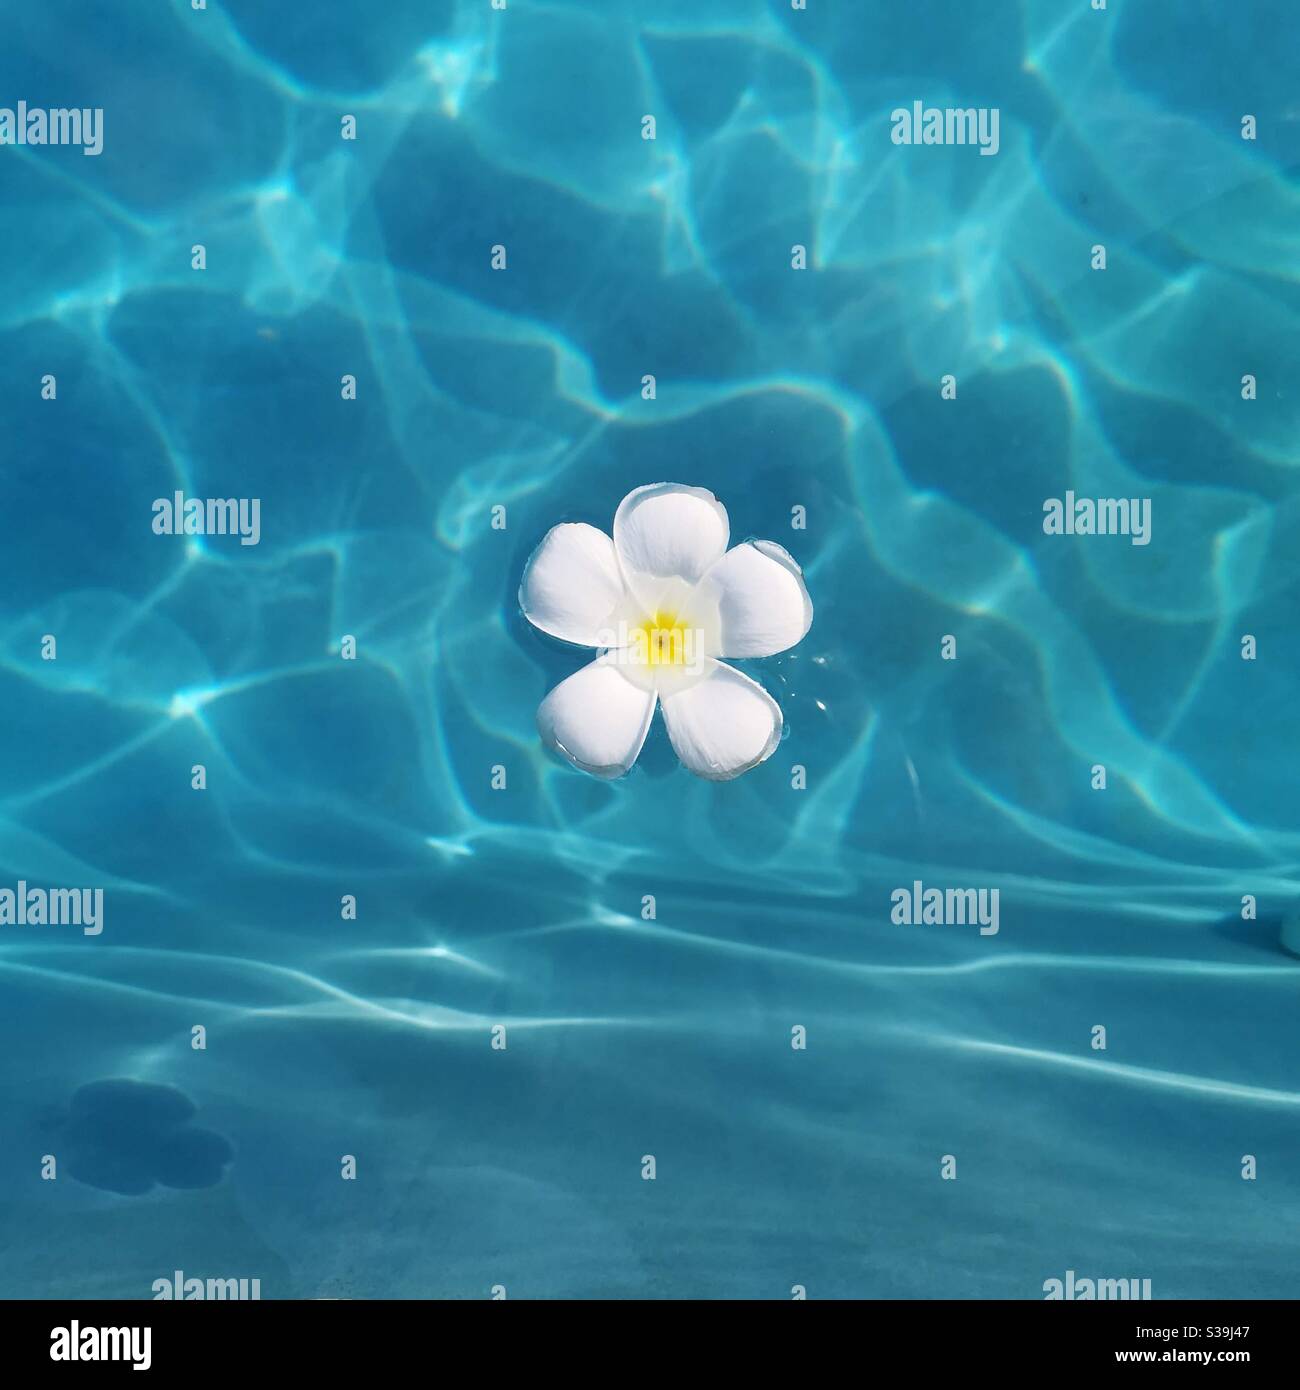 One frangipani flower floating in turquoise blue water Stock Photo